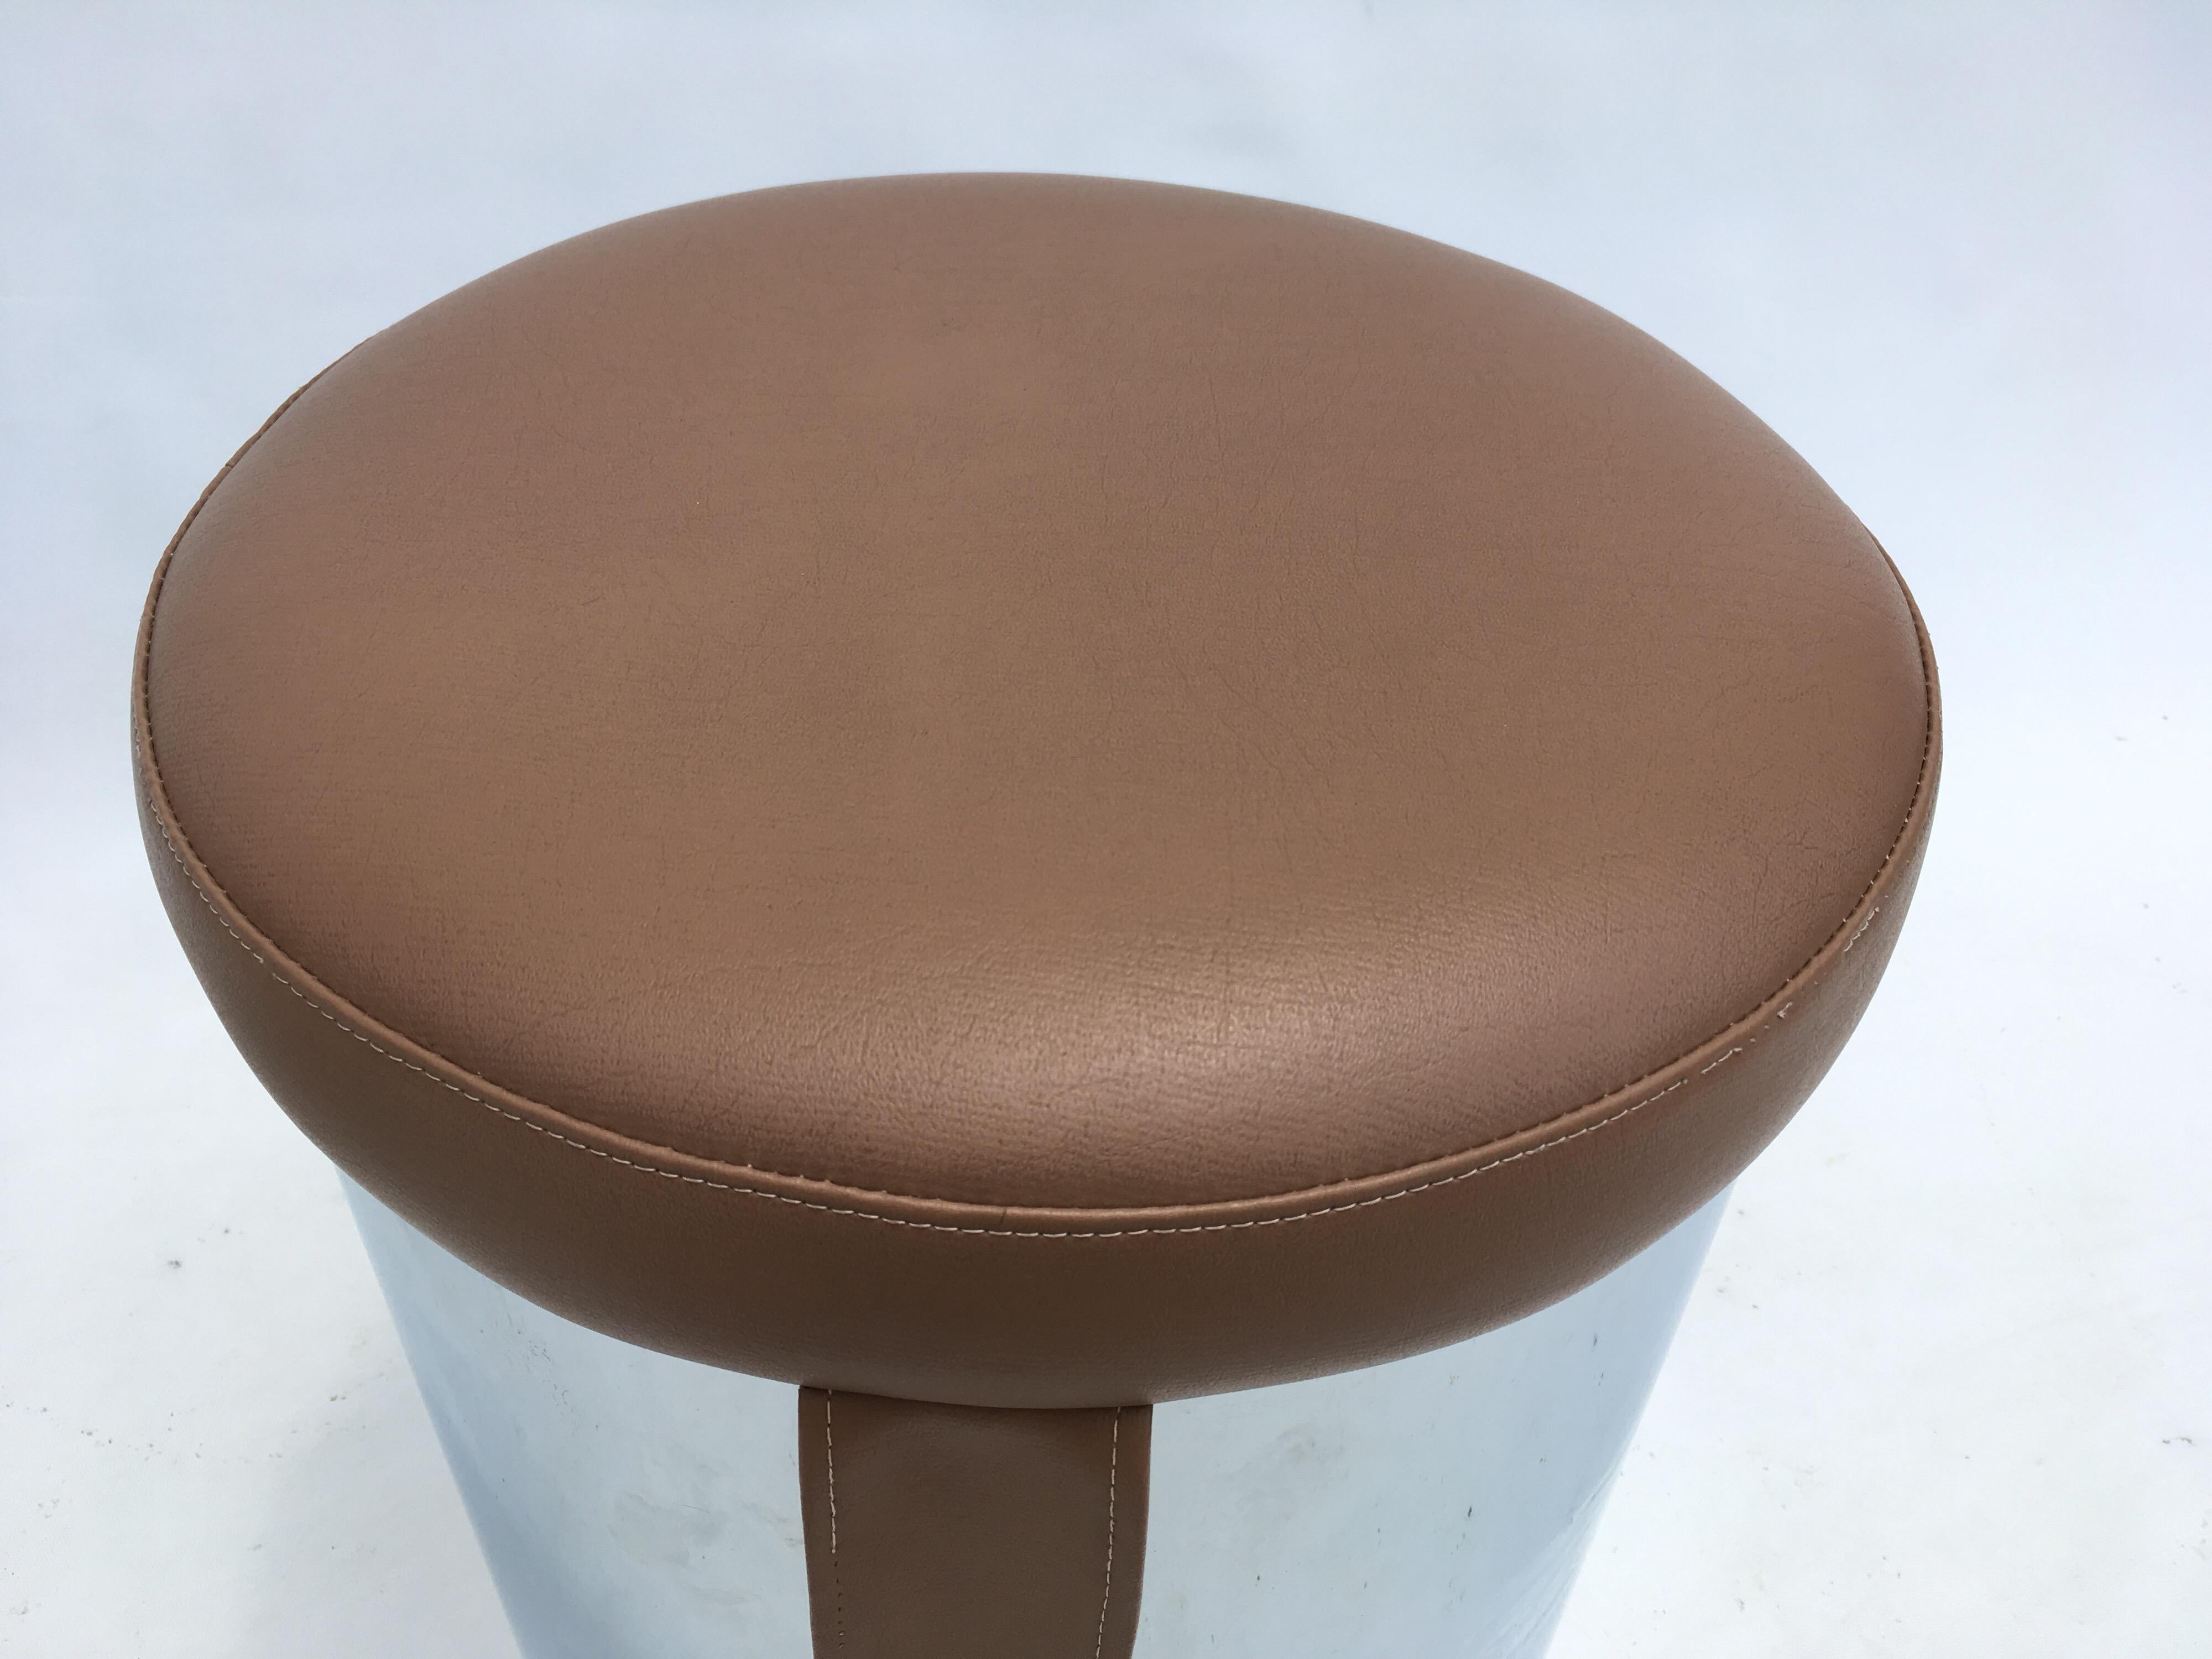 Pair of Chromed Mid-Century Modern Stools Ottomans In Good Condition For Sale In Miami, FL